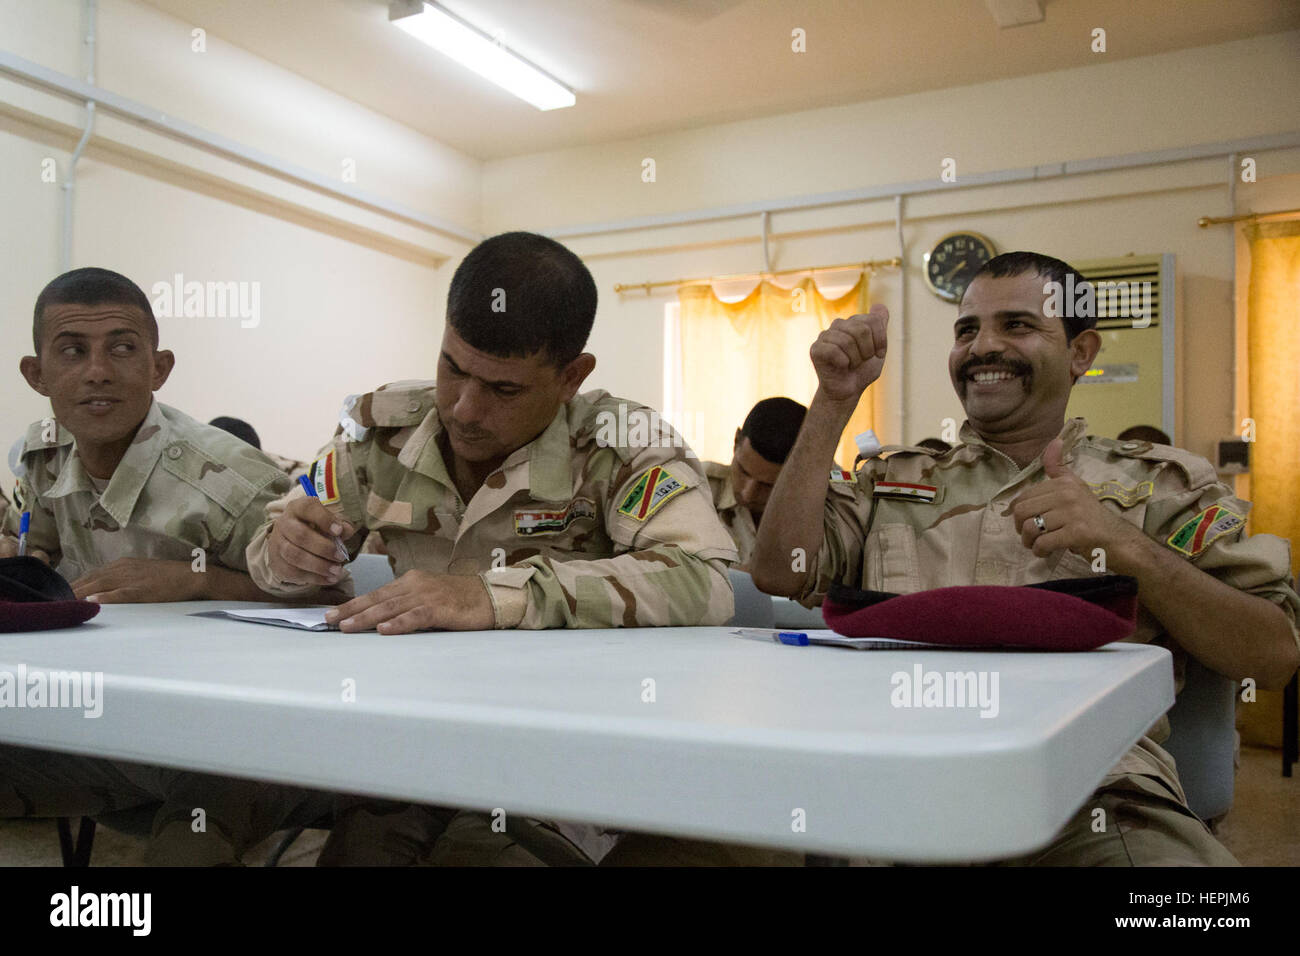 An Iraqi soldier attending the noncommissioned officer academy gives thumbs up after completing a map reading test at Camp Taji, Iraq, Aug. 23, 2015. Task Group Taji spearheaded the academy concept in order to teach Iraqi NCOs how to train and care for their soldiers in different situations. Through professional development with the Iraqi NCOs, Combined Joint Task Force – Operation Inherent Resolve is empowering the Iraqi security forces in the fight against the Islamic State of Iraq and the Levant. (U.S. Army photo by Spc. Paris Maxey/Released) Iraqis Attend NCO academy 150823-A-XM842-067 Stock Photo